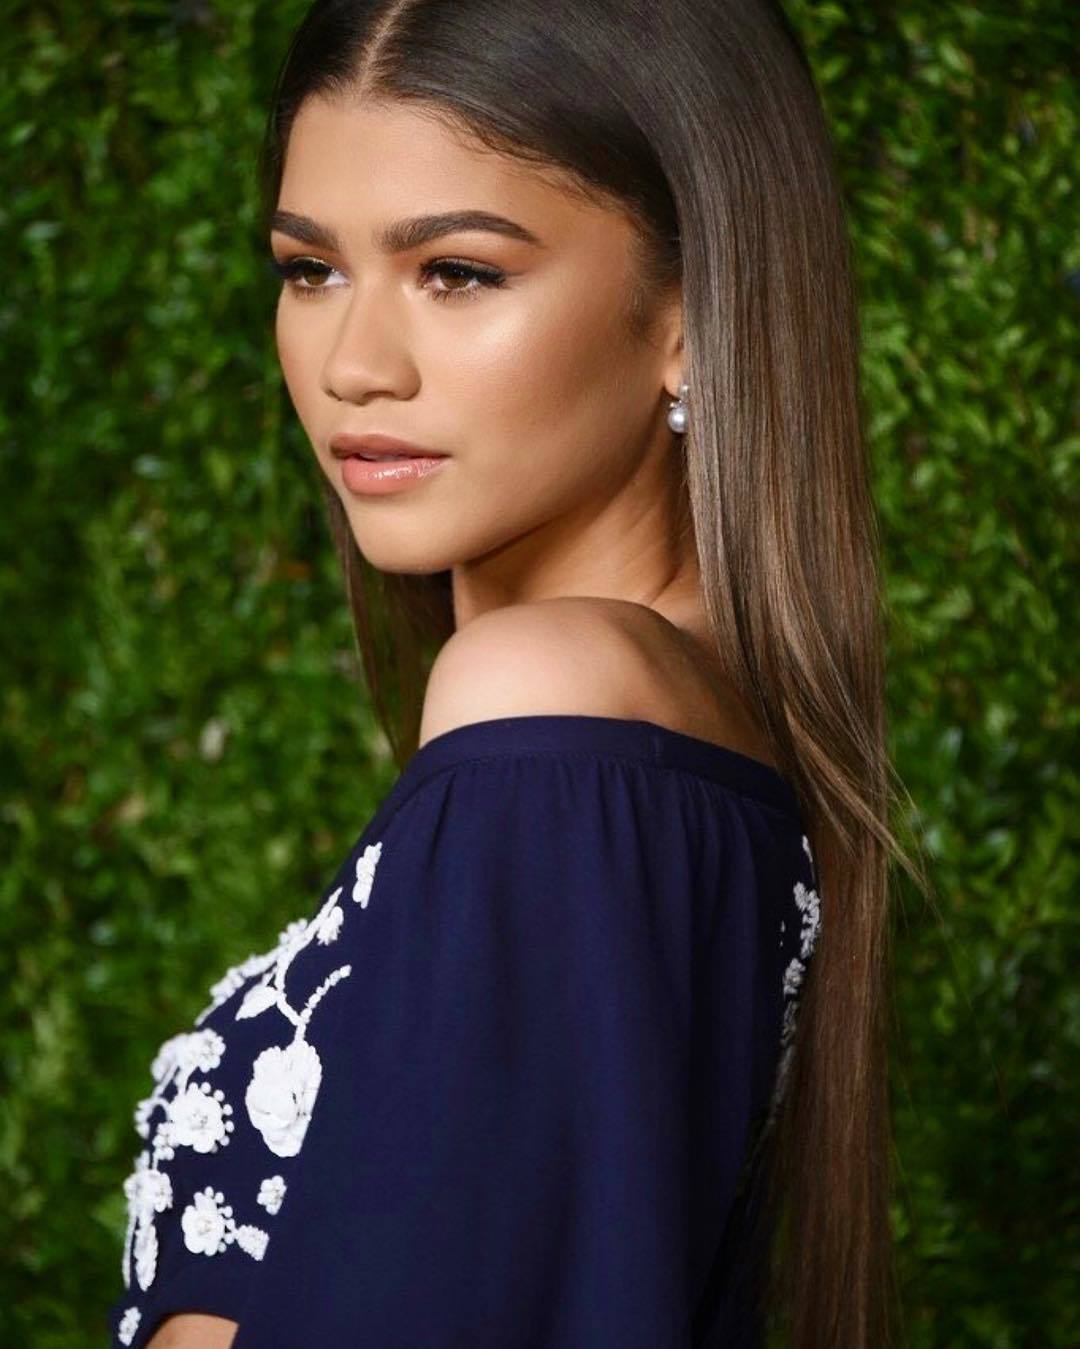 zendaya discovered her clothing line's latest model in a misogynistic meme | read | i-D1080 x 1349